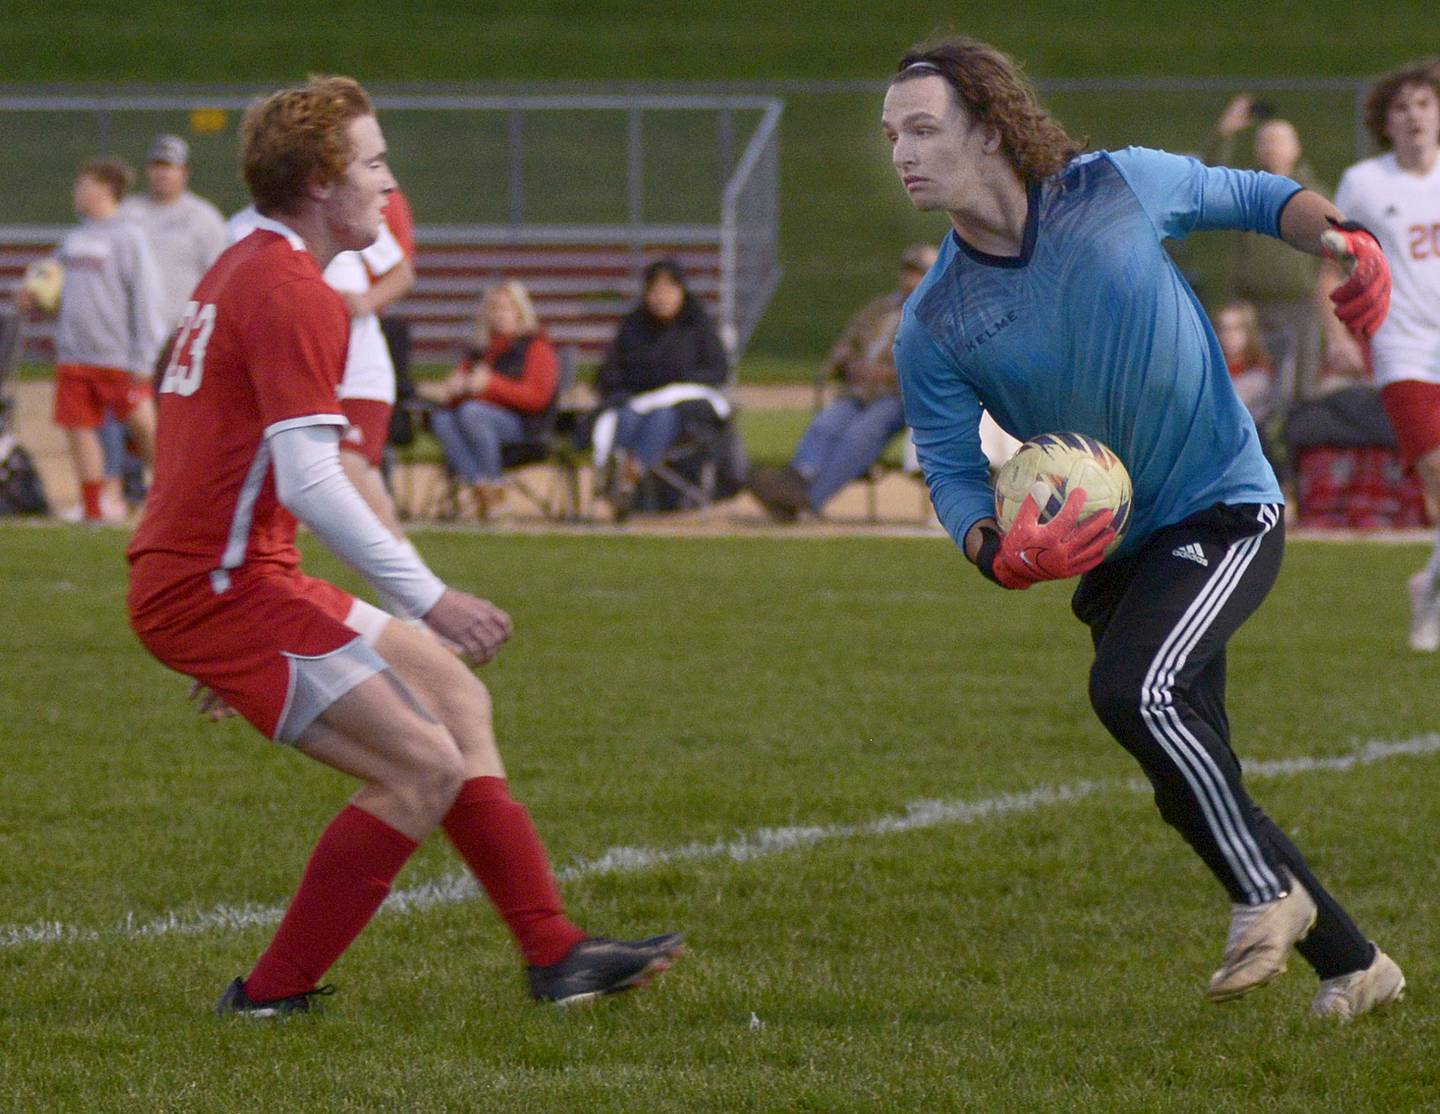 Streator keeper Noah Camp scoops up the ball in front of Ottawa's Evan Snook in the first half of Tuesday's match at Ottawa.